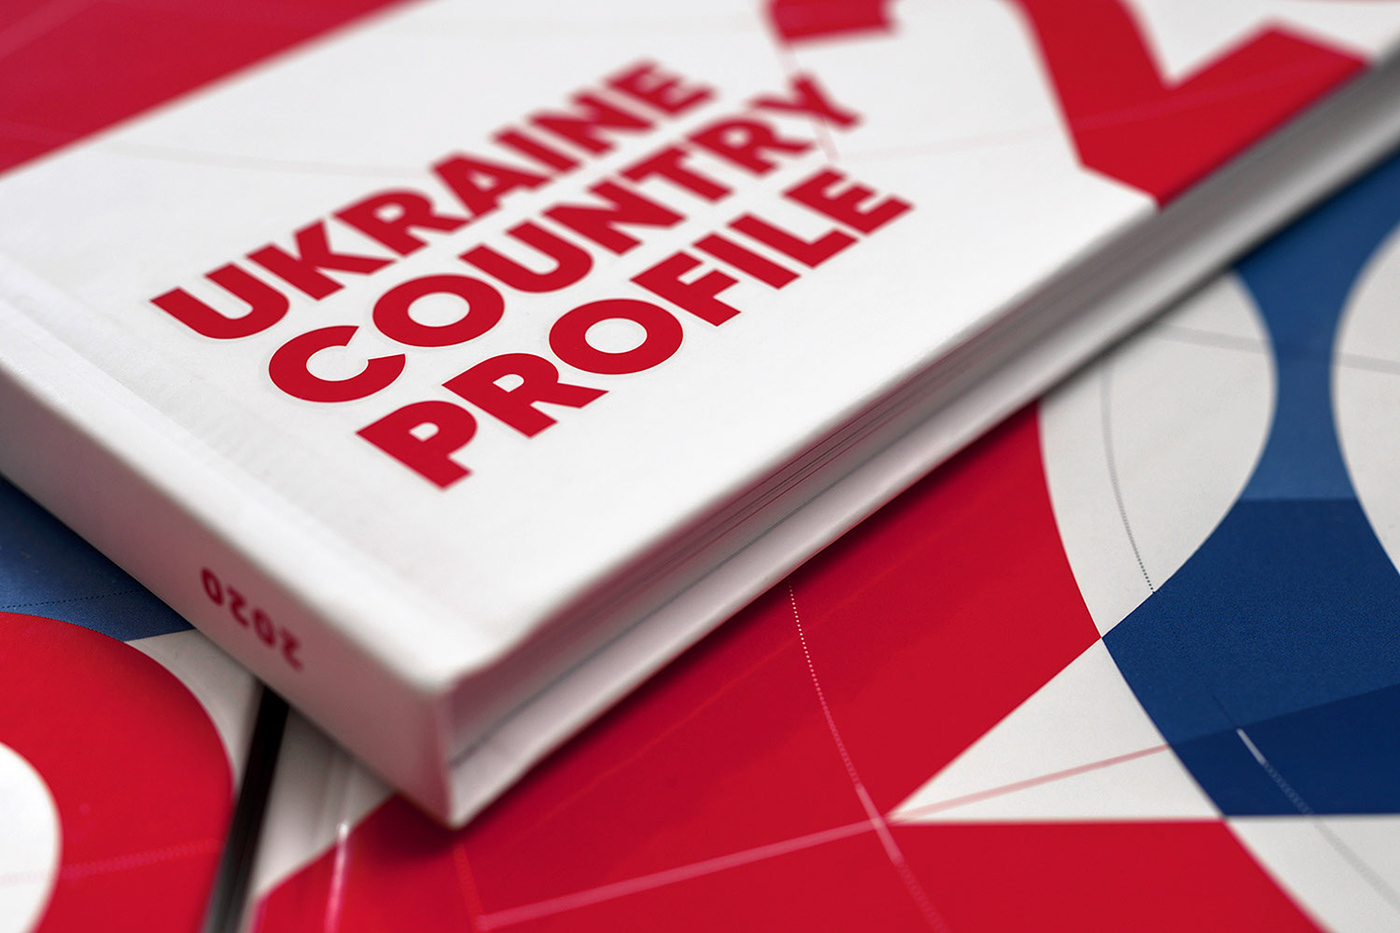 Business cover design for an economic publication in red and blue colors. Ukraine Country Profile